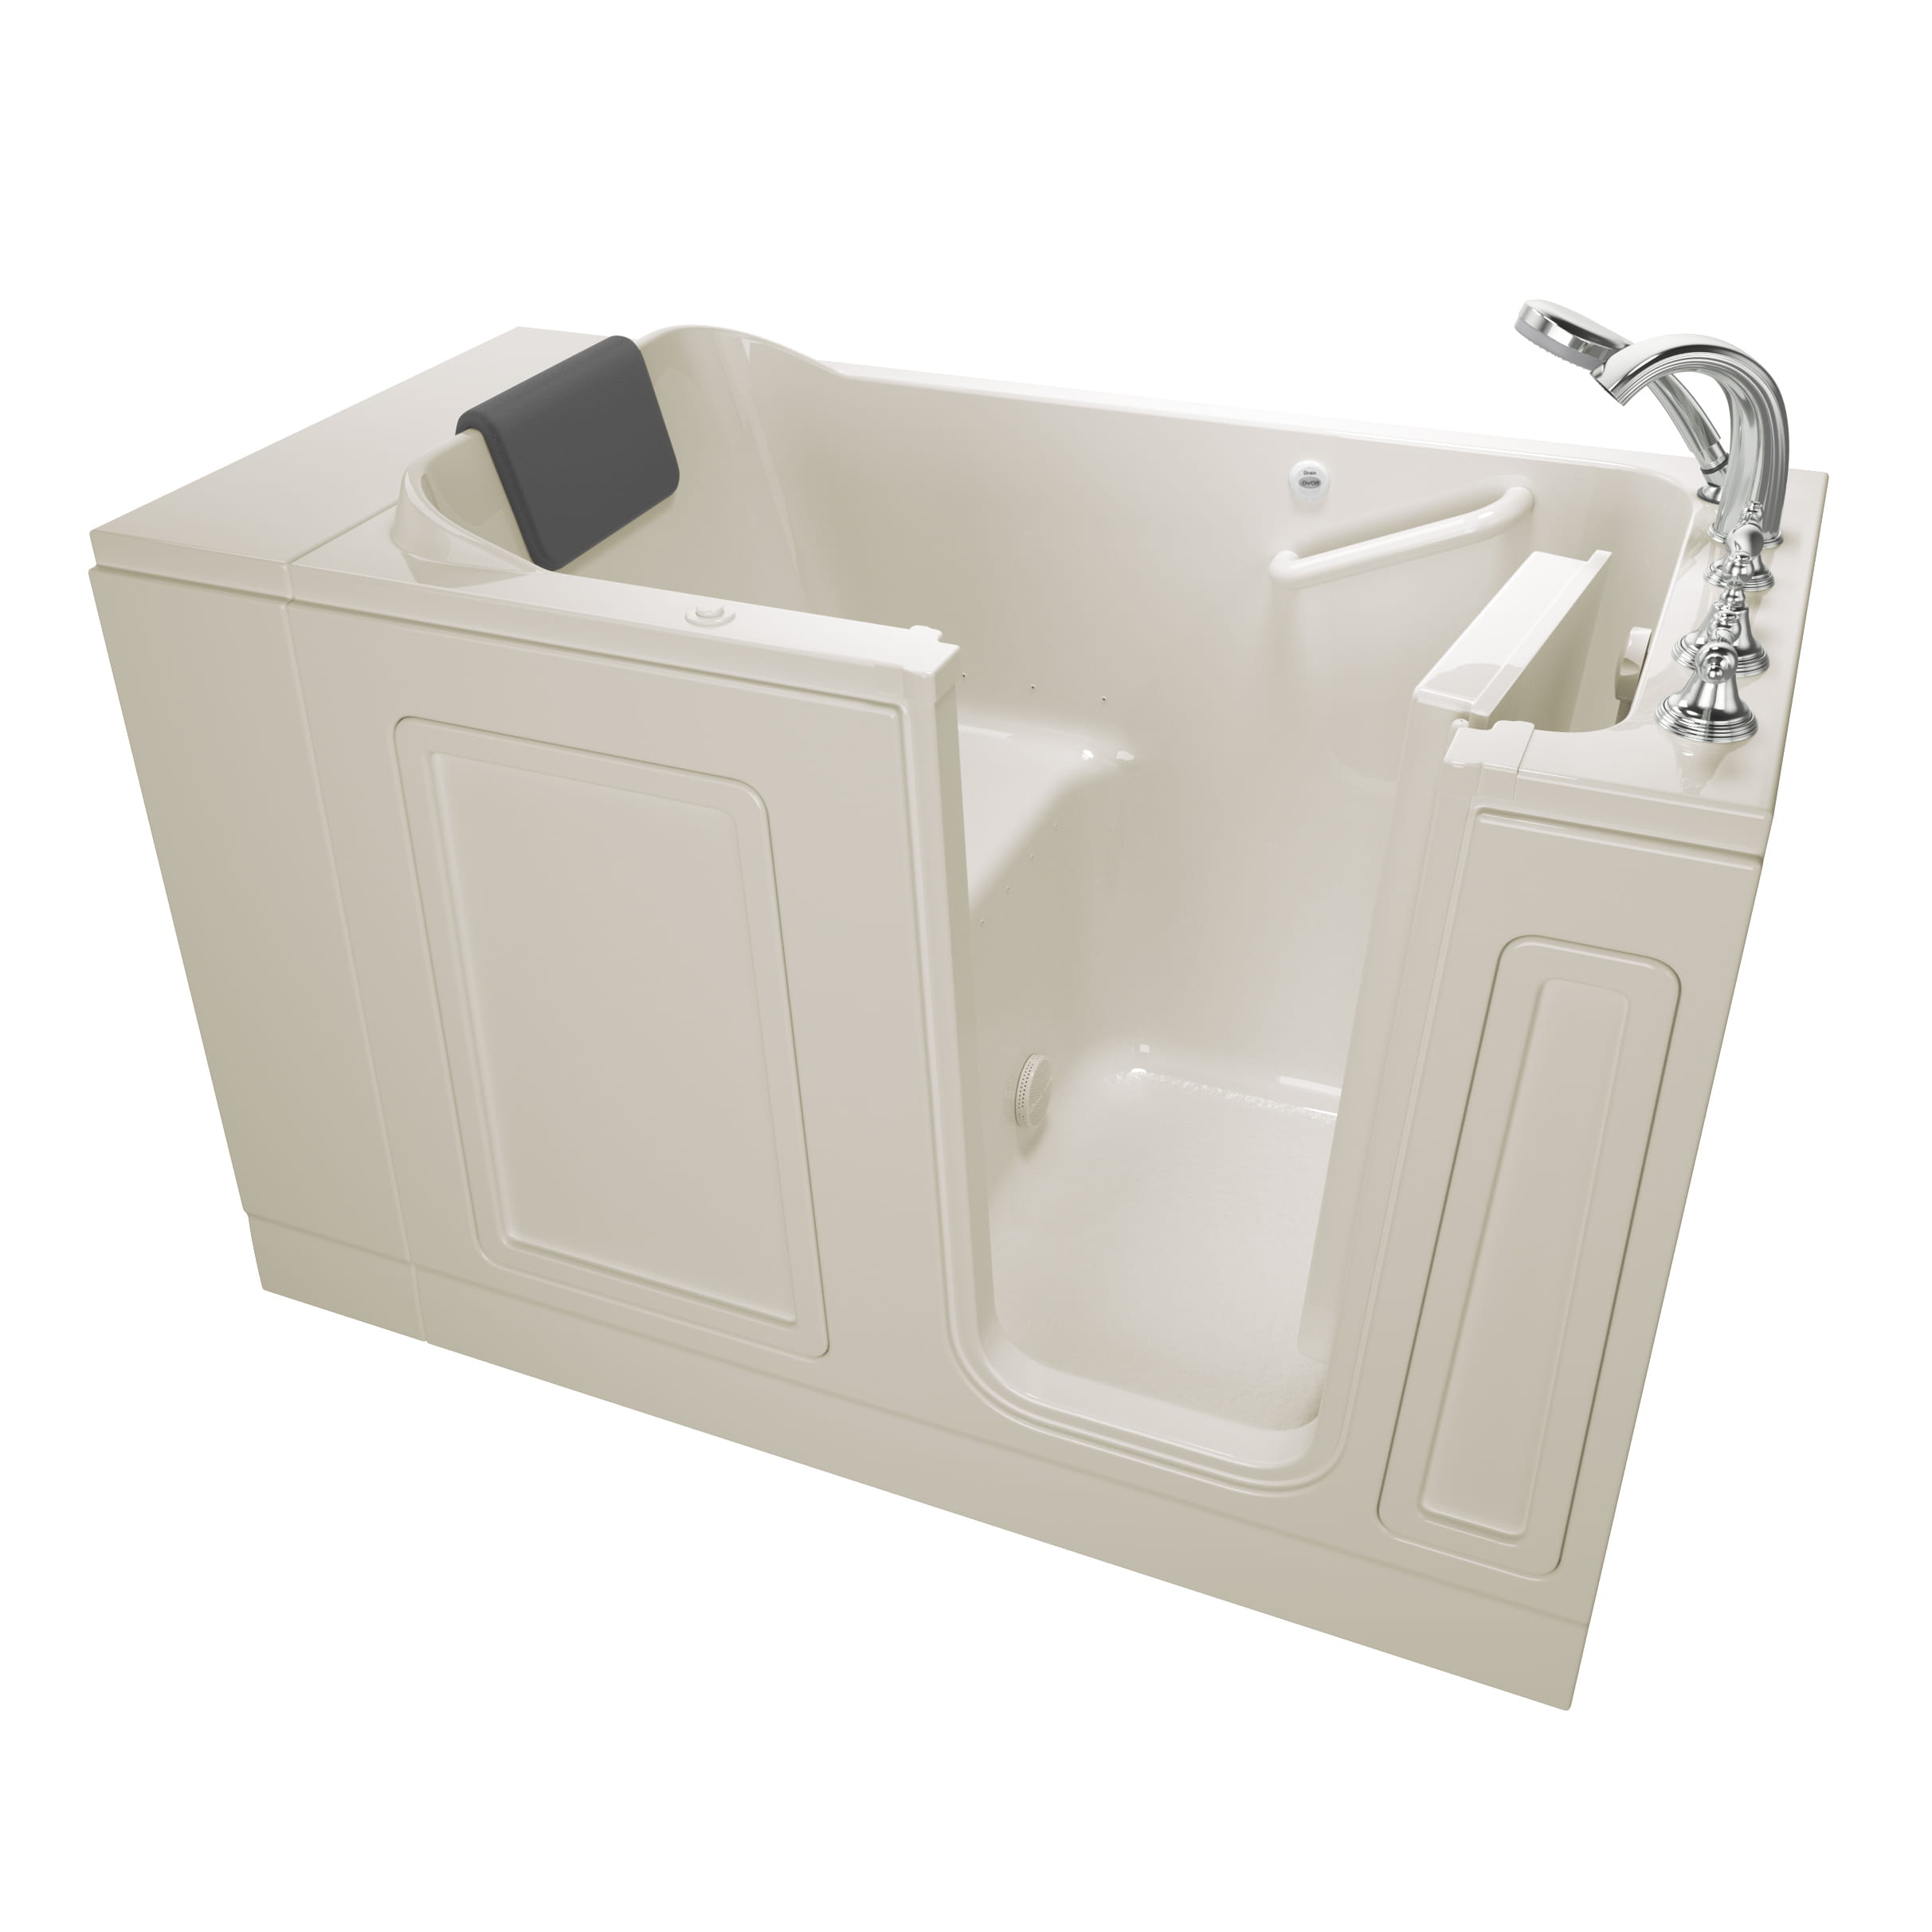 Acrylic Luxury Series 30 x 51  Inch Walk in Tub With Air Spa System   Right Hand Drain With Faucet WIB LINEN